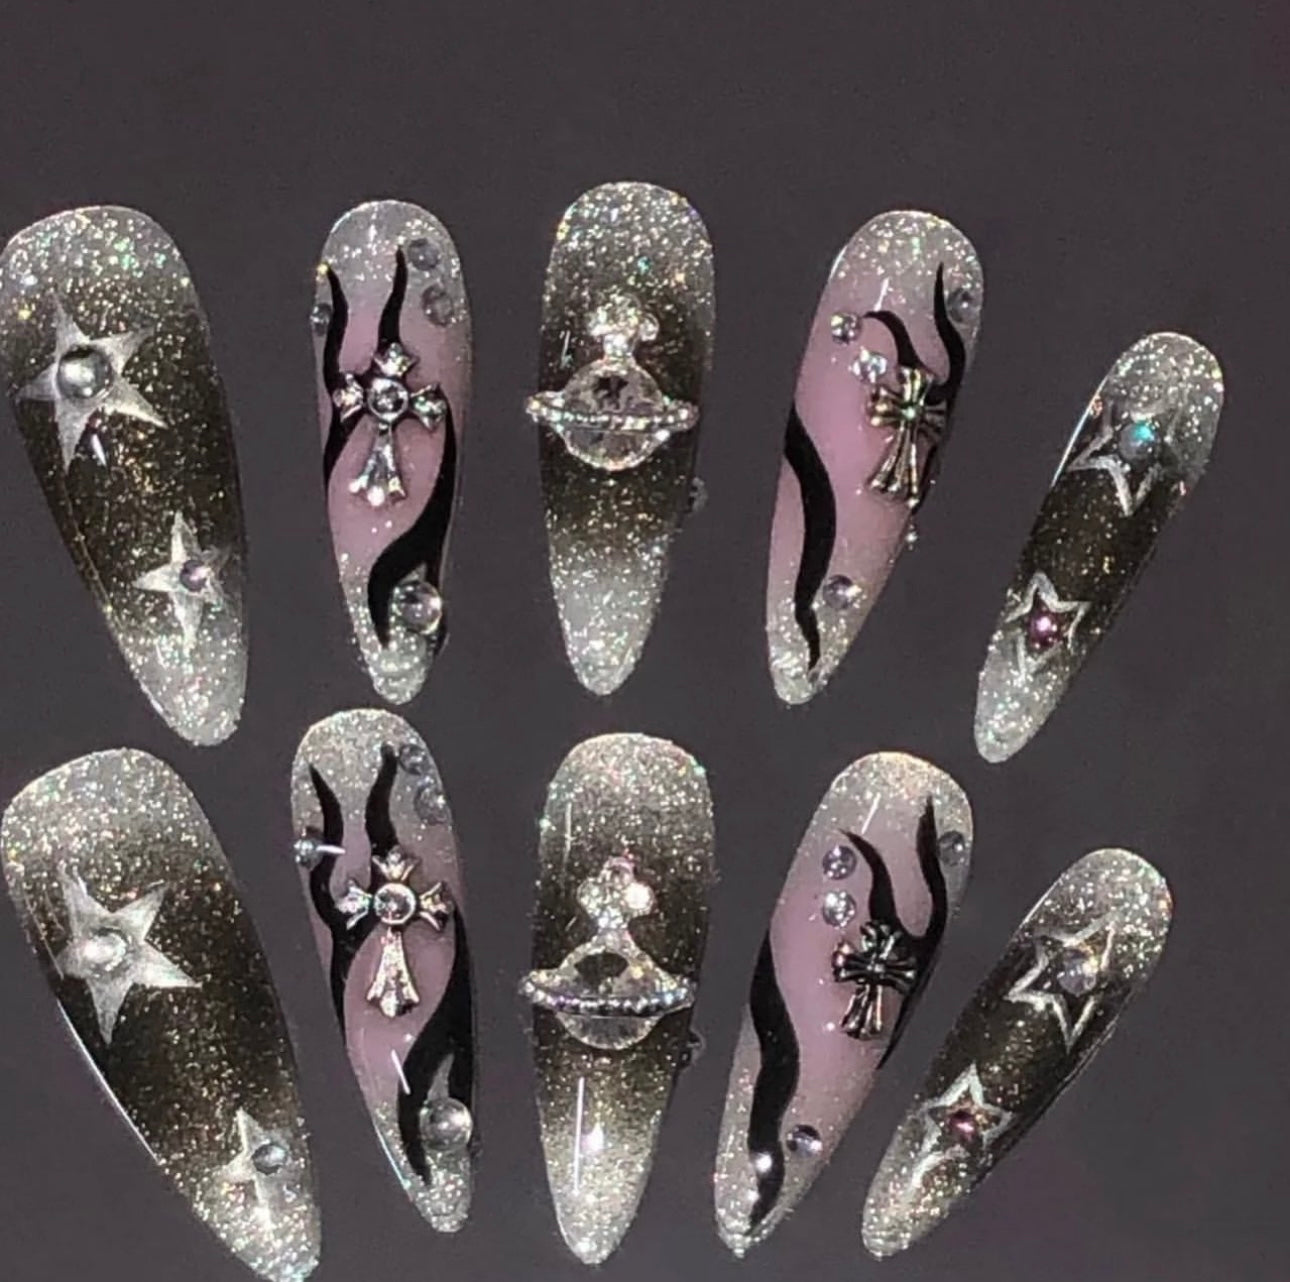 The Empress Dowager's black high-end nails